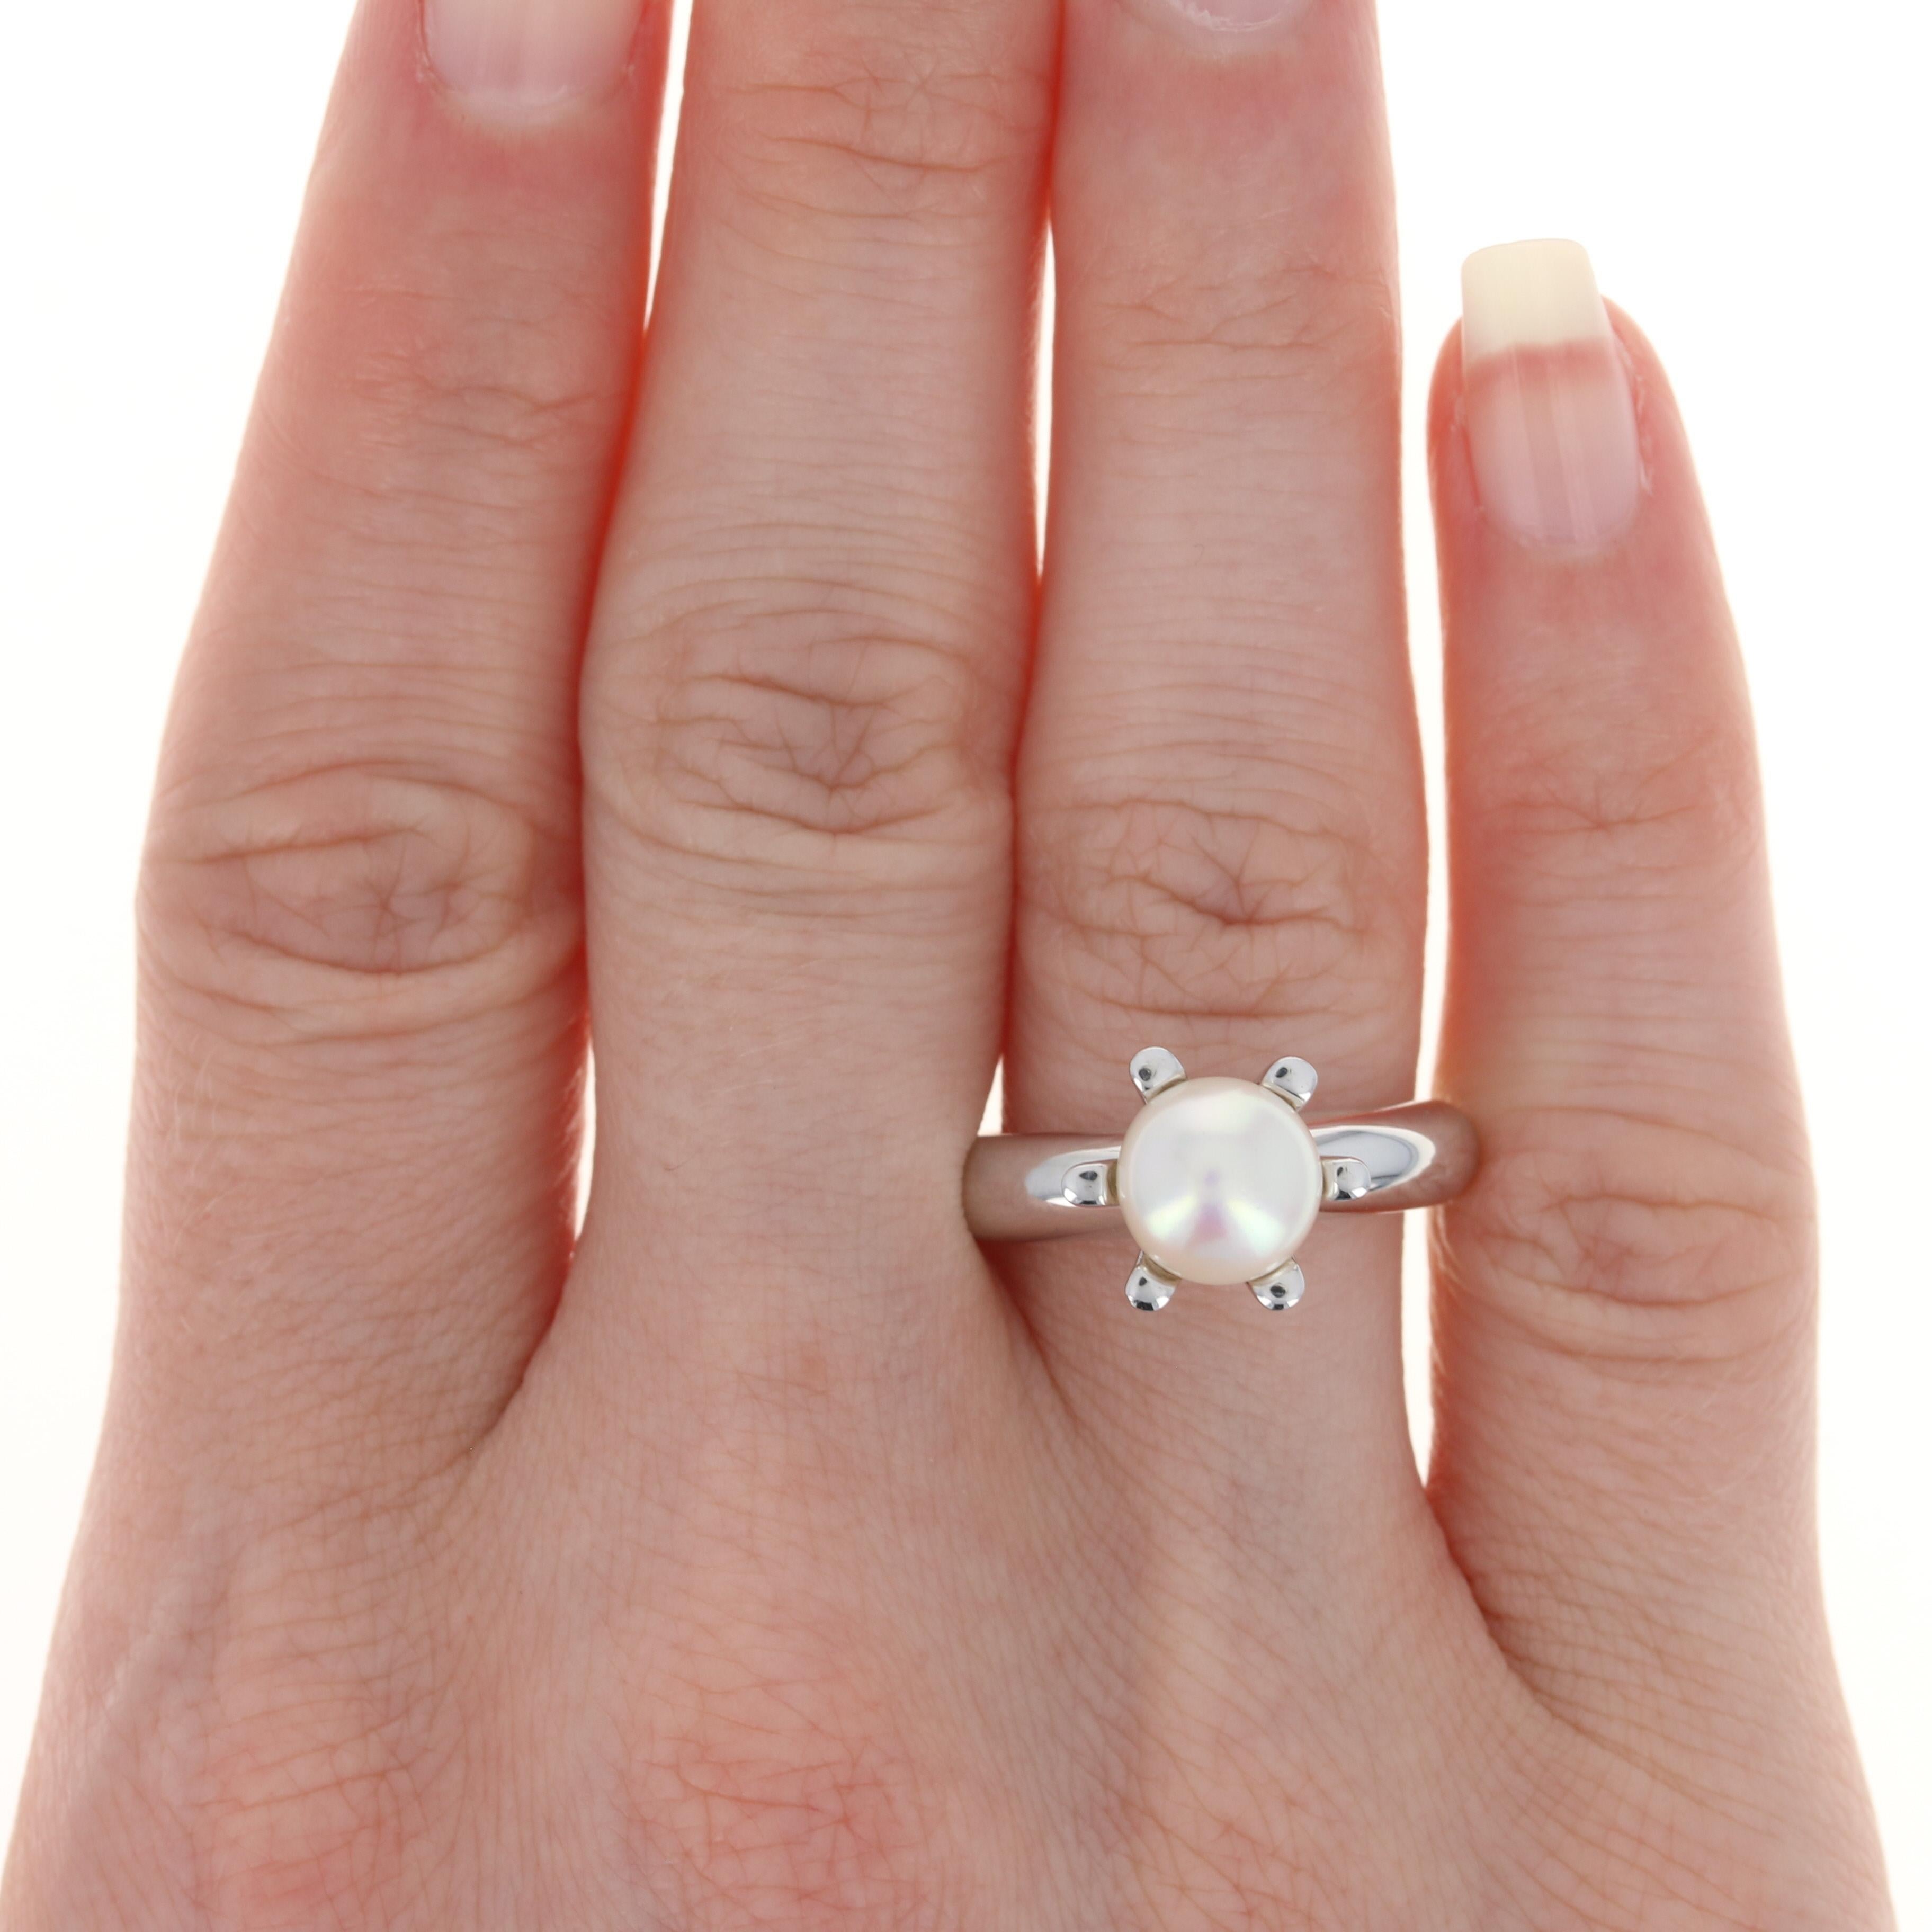 This ring retails at $250
This ring is a size 7 1/2 - 7 3/4. Please contact for additional sizing options.
Metal Content: Sterling Silver
Finish: Polished
Stone: Freshwater Pearl
Face Height (north to south): 13/32